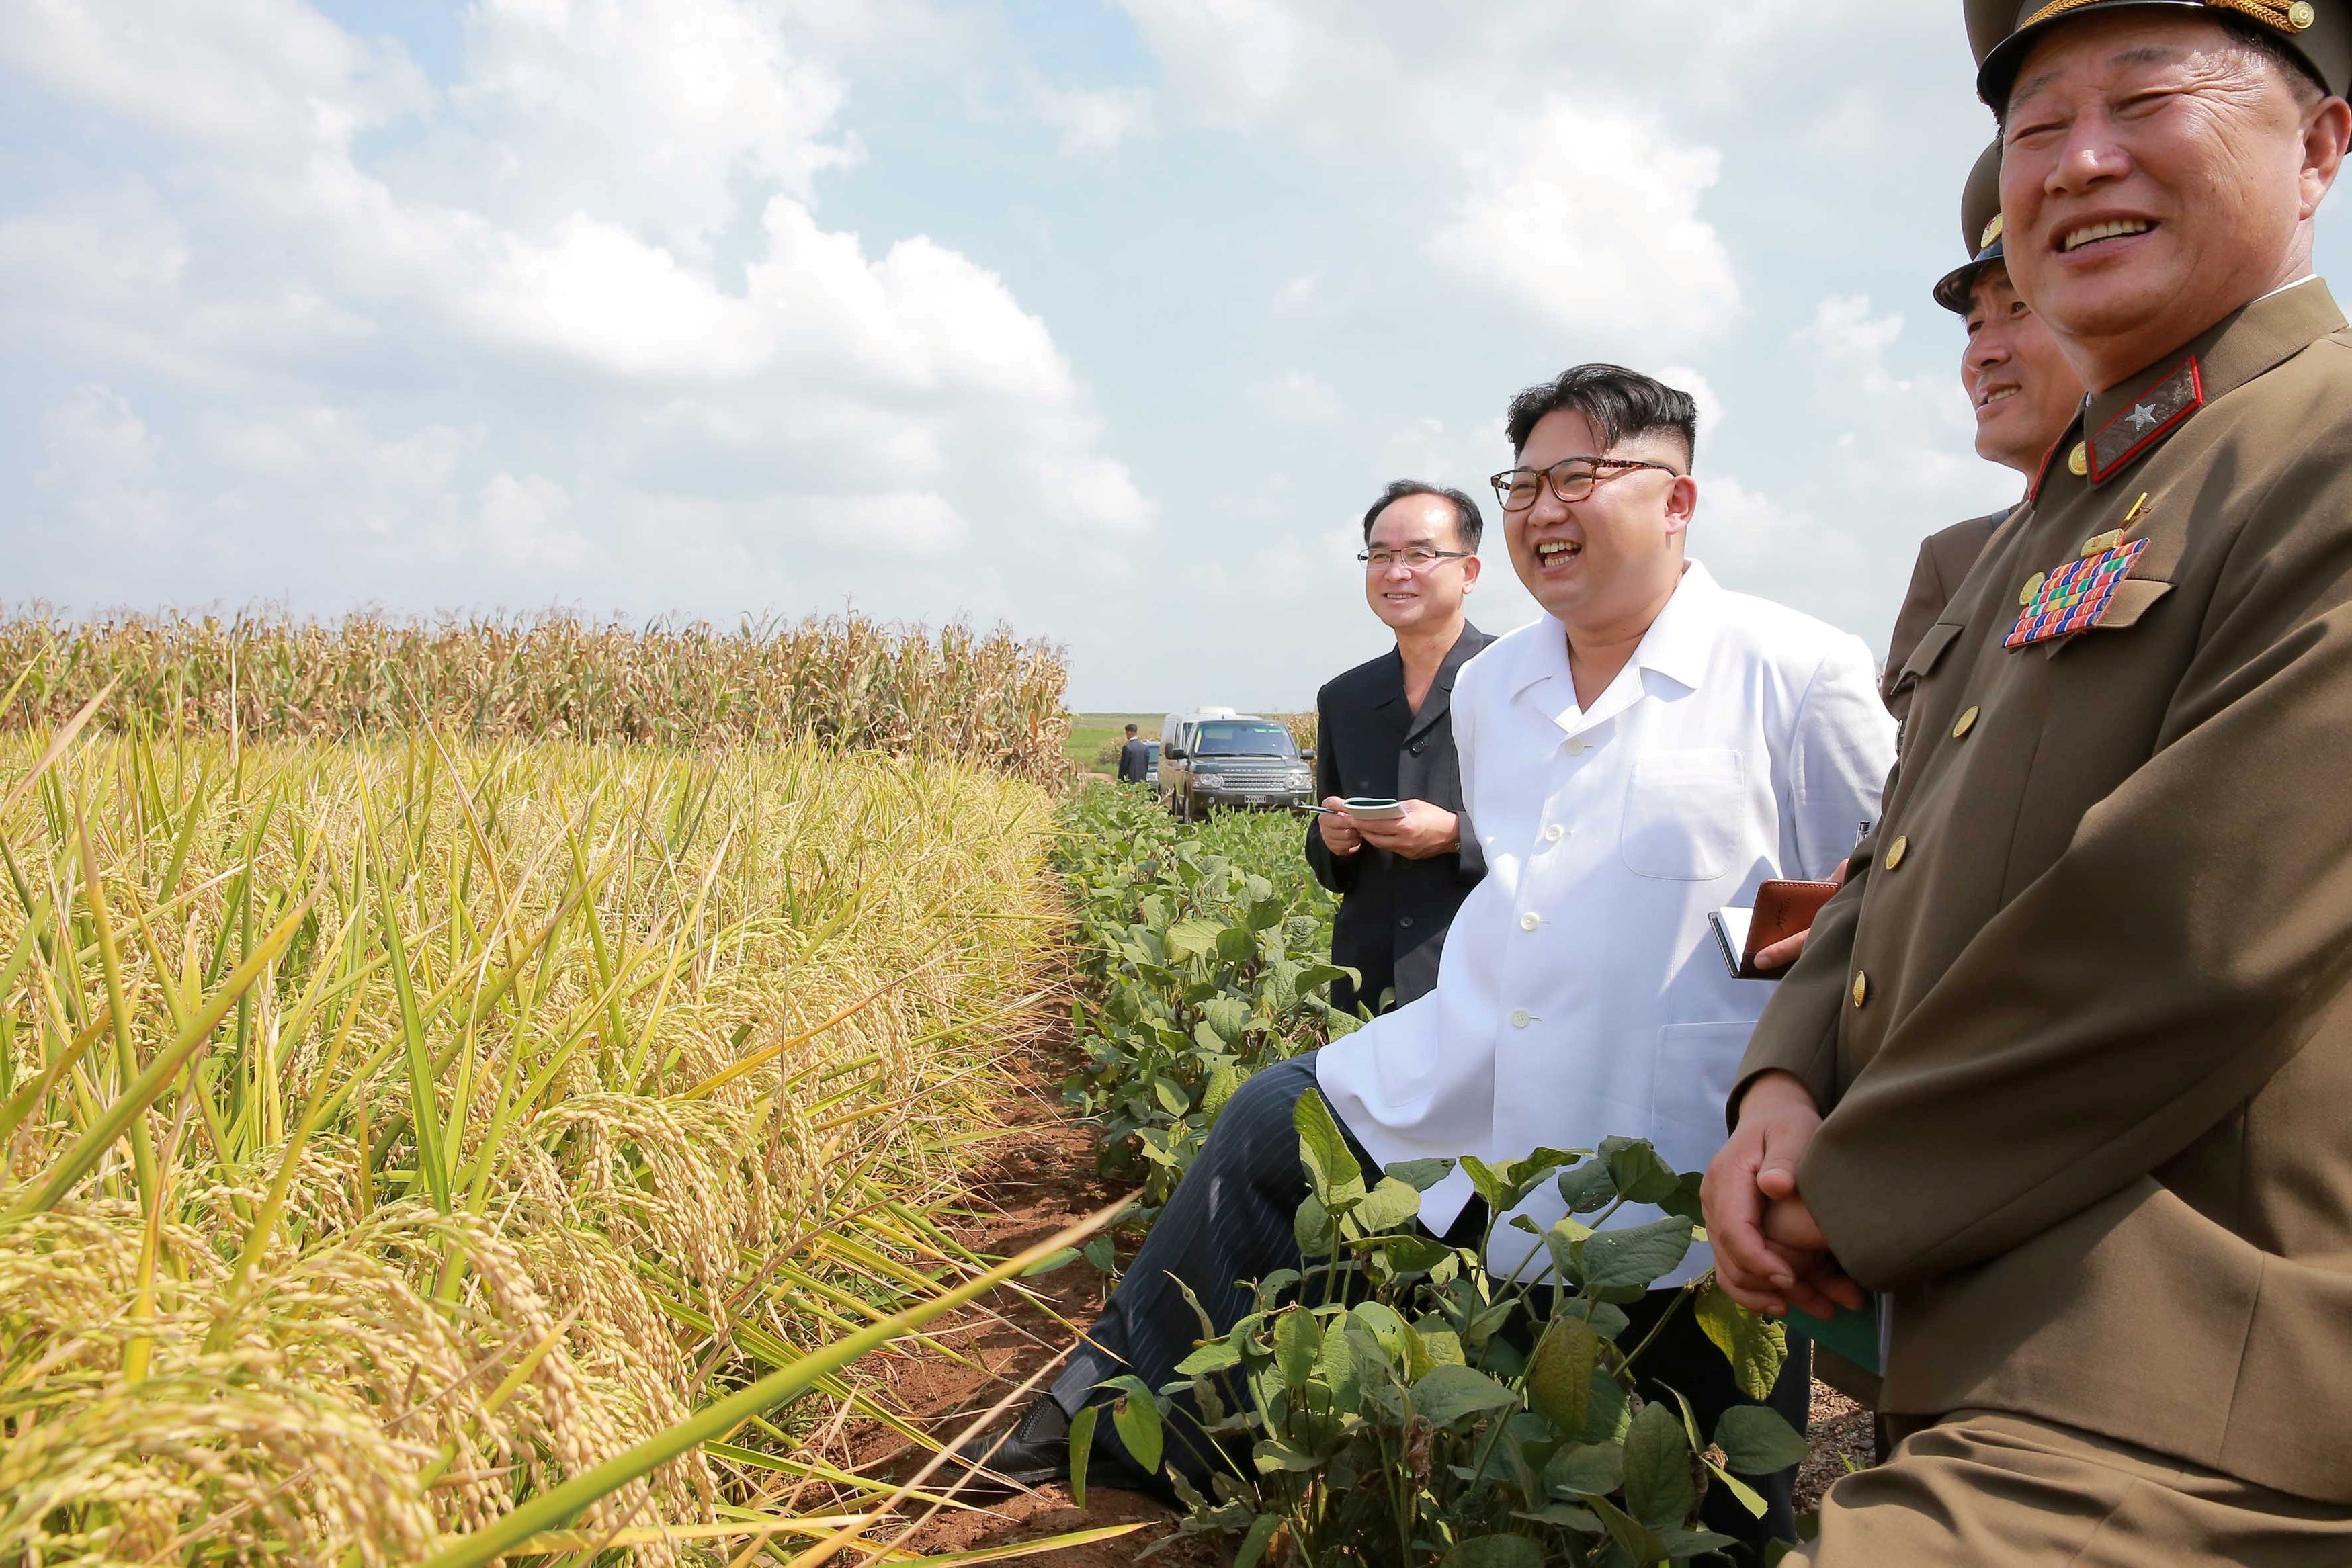 North Korean leader Kim Jong Un provides field guidance to Farm No 1116 under KPA Unit 810, in this photo released by North Korea's Korean Central News Agency in Pyongyang on in September 2016. Photo: KCNA via Reuters